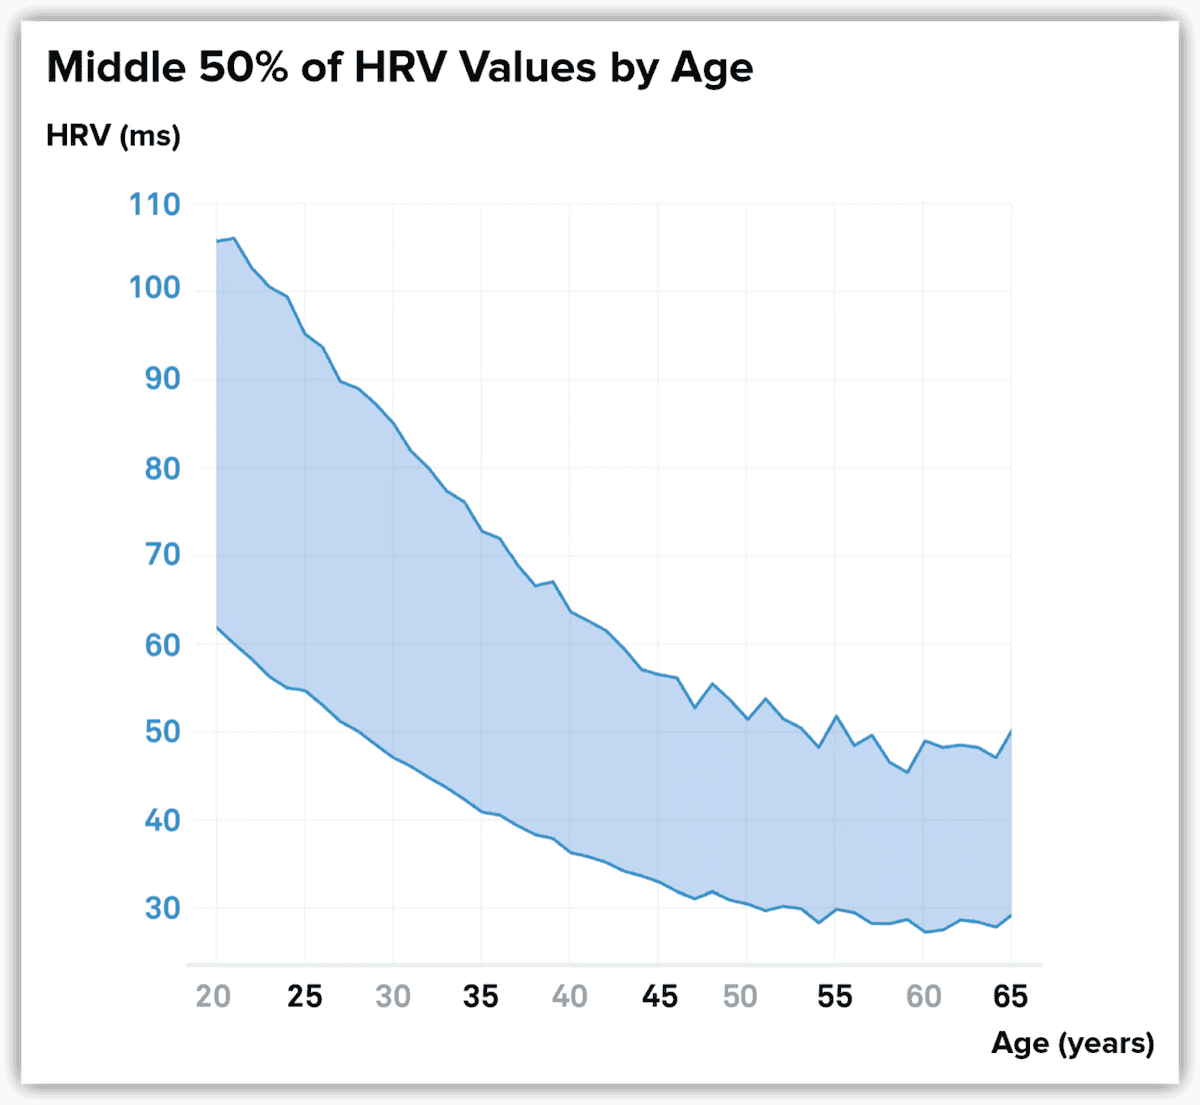 Middle HRV Values by Age